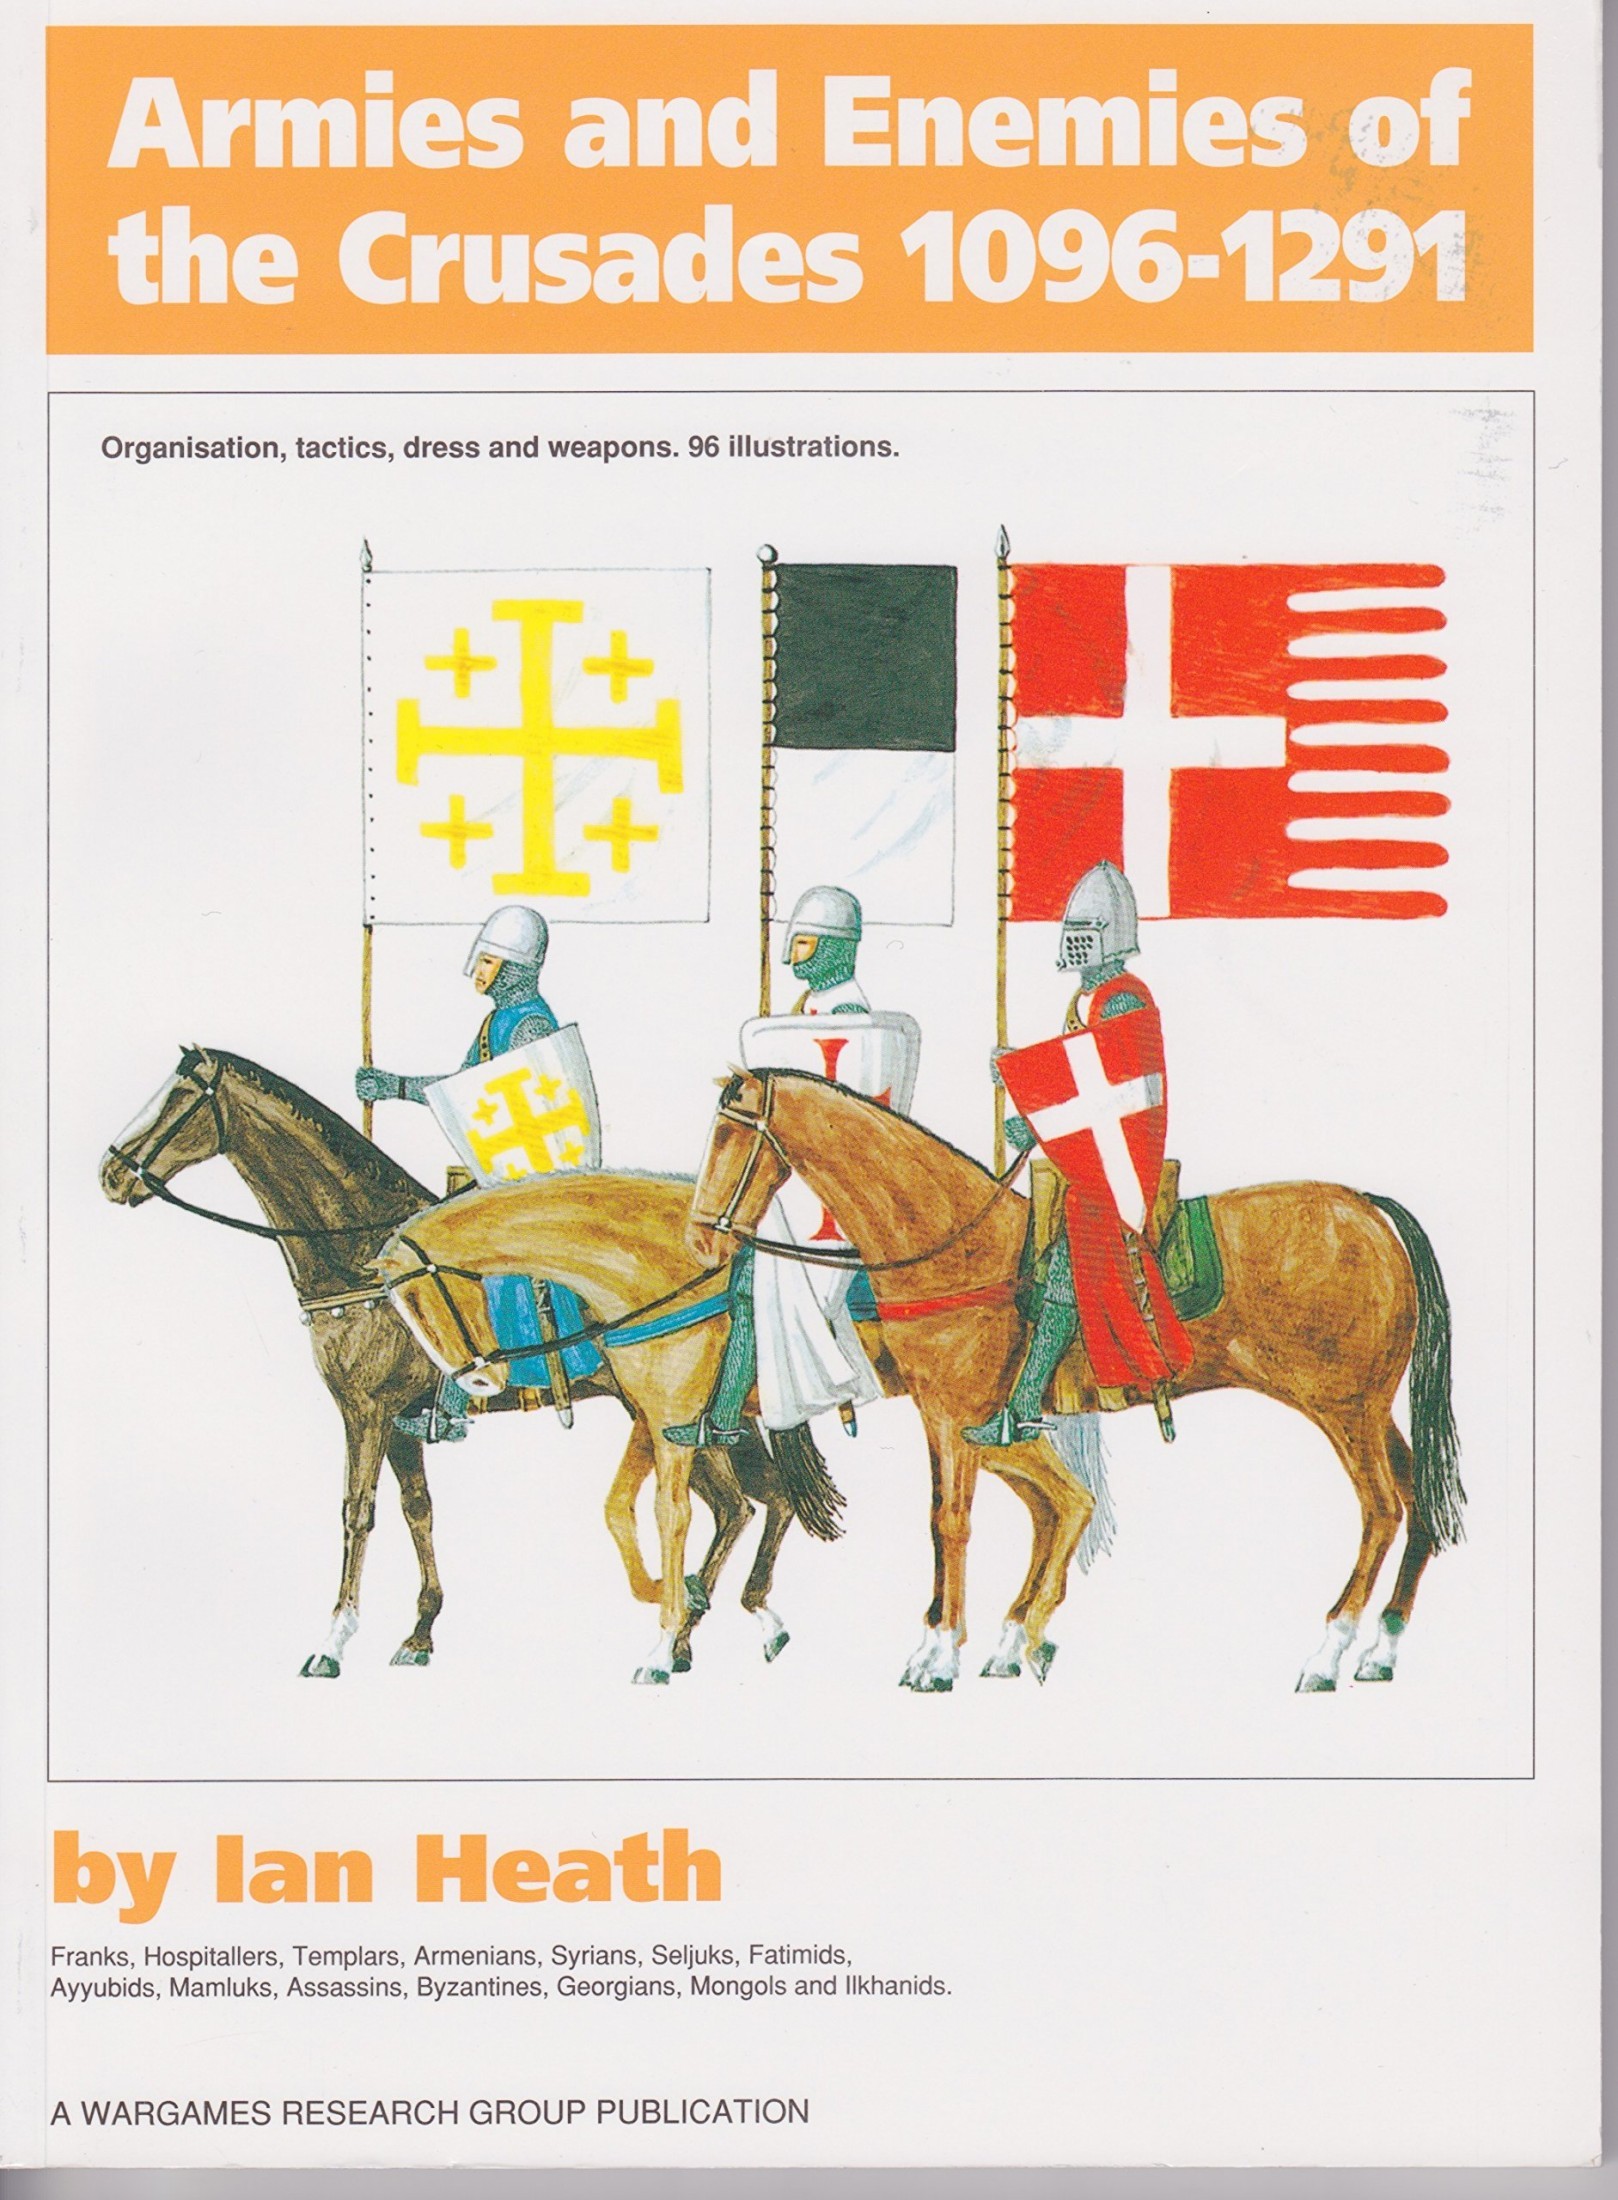 Armies and Enemies of the Crusades, 1096-1291: Organization, Tactics, Dress and Weapons